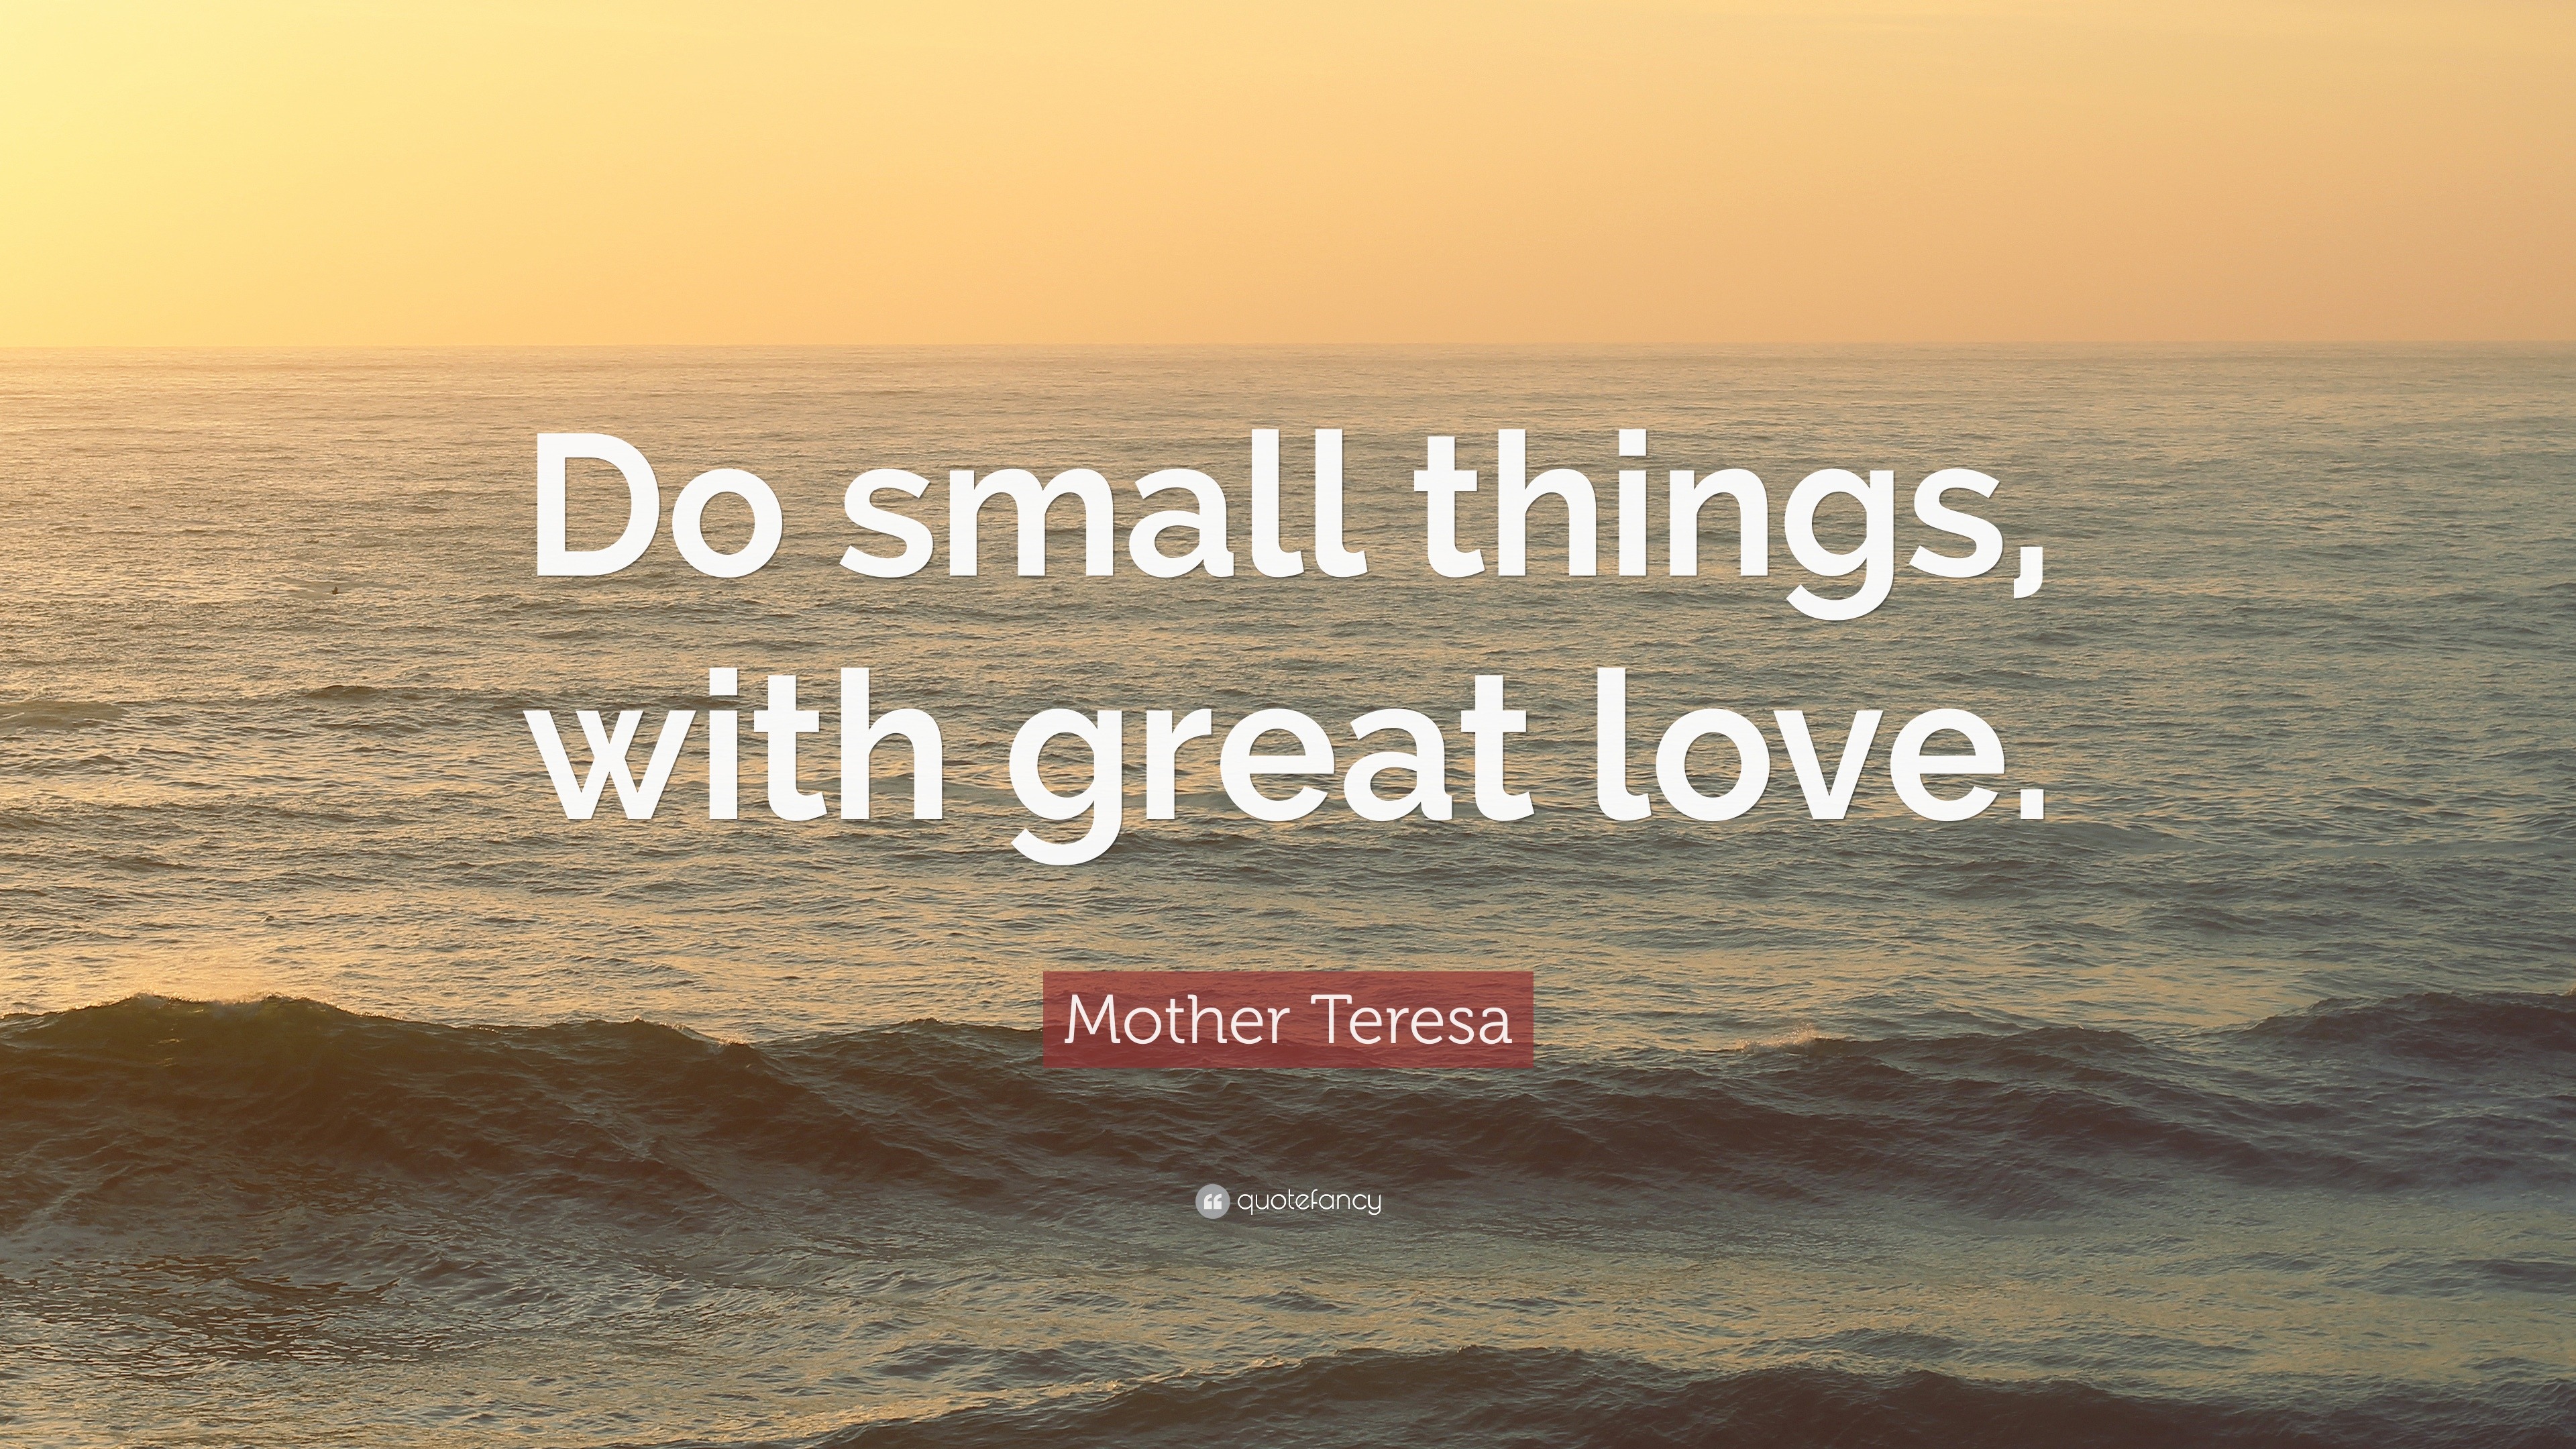 Mother Teresa Quote  Do small things with great  love  